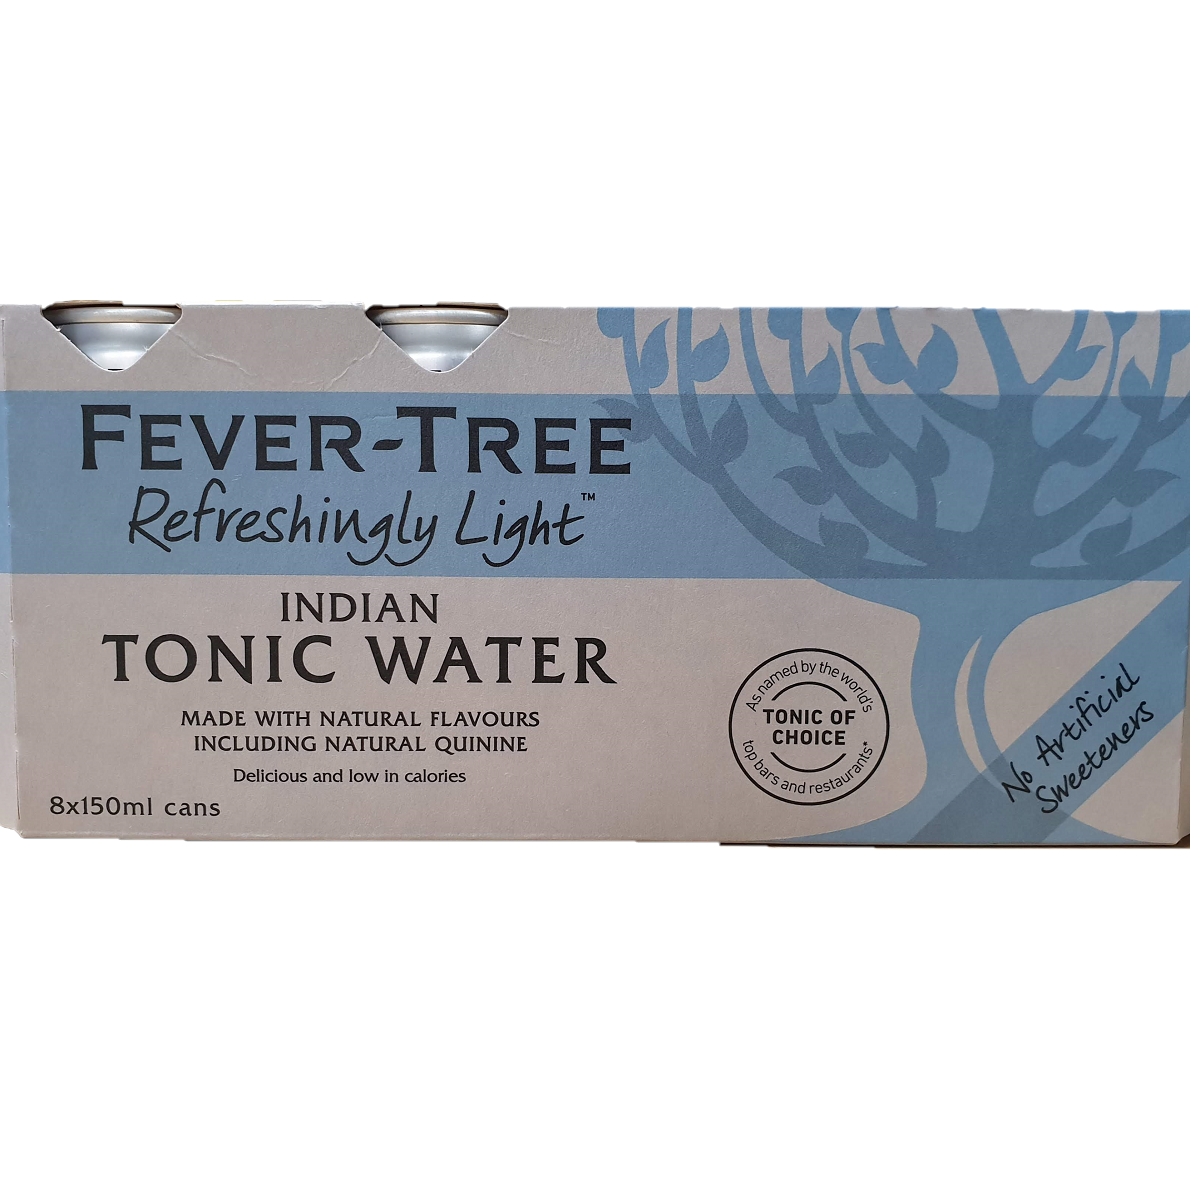 Fever-Tree Indian Tonic Water 8x150ml